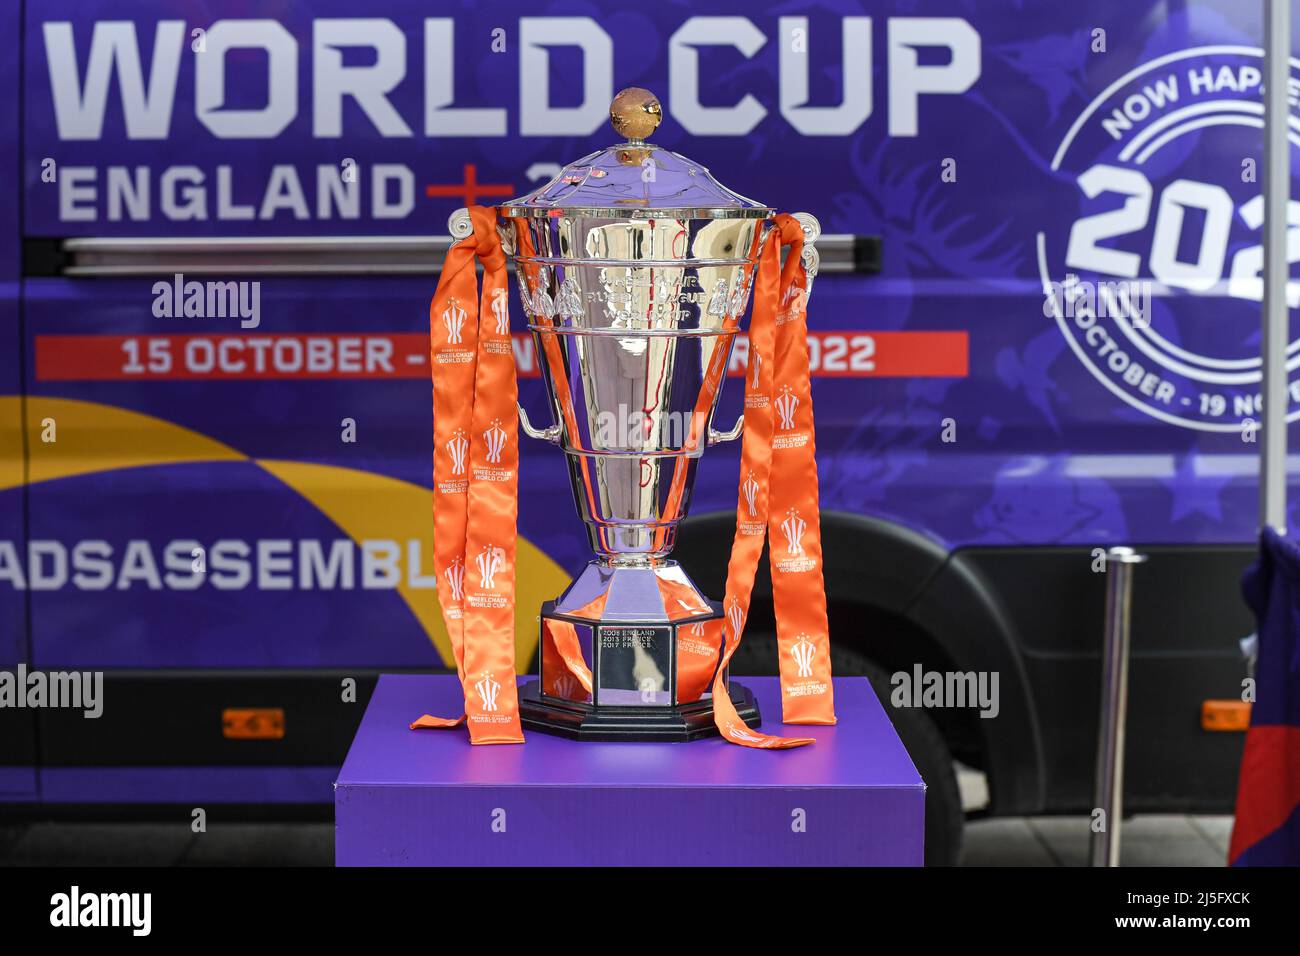 The Rugby League World Cup trophies on display in Warrington town centre before the Betfred Super League game between Warrington Wolves and Huddersfield Giants Stock Photo